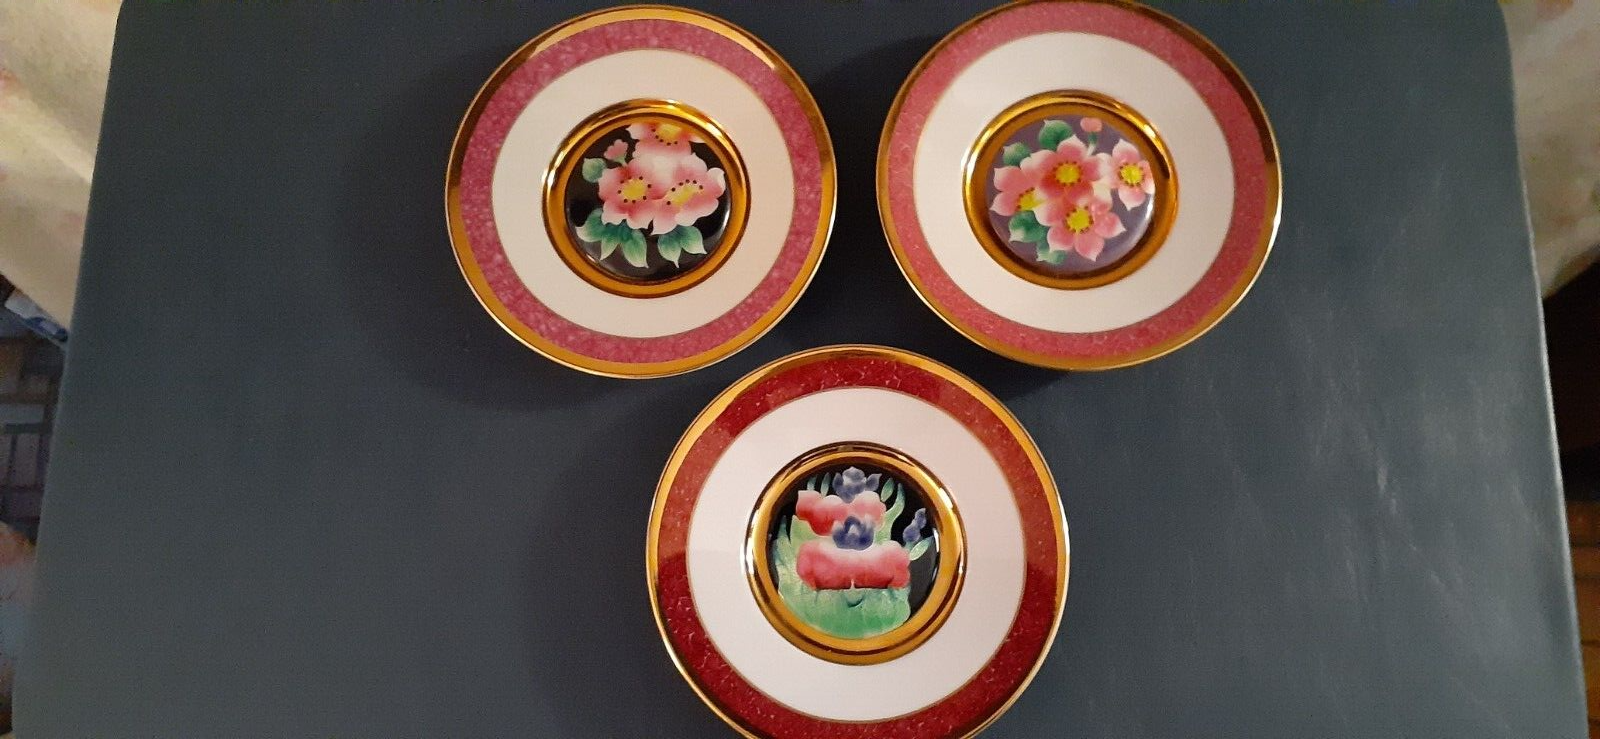 Primary image for Japanese Cloisonne Plate Collection-Plum Blossom, Iris, and Peach Blossom